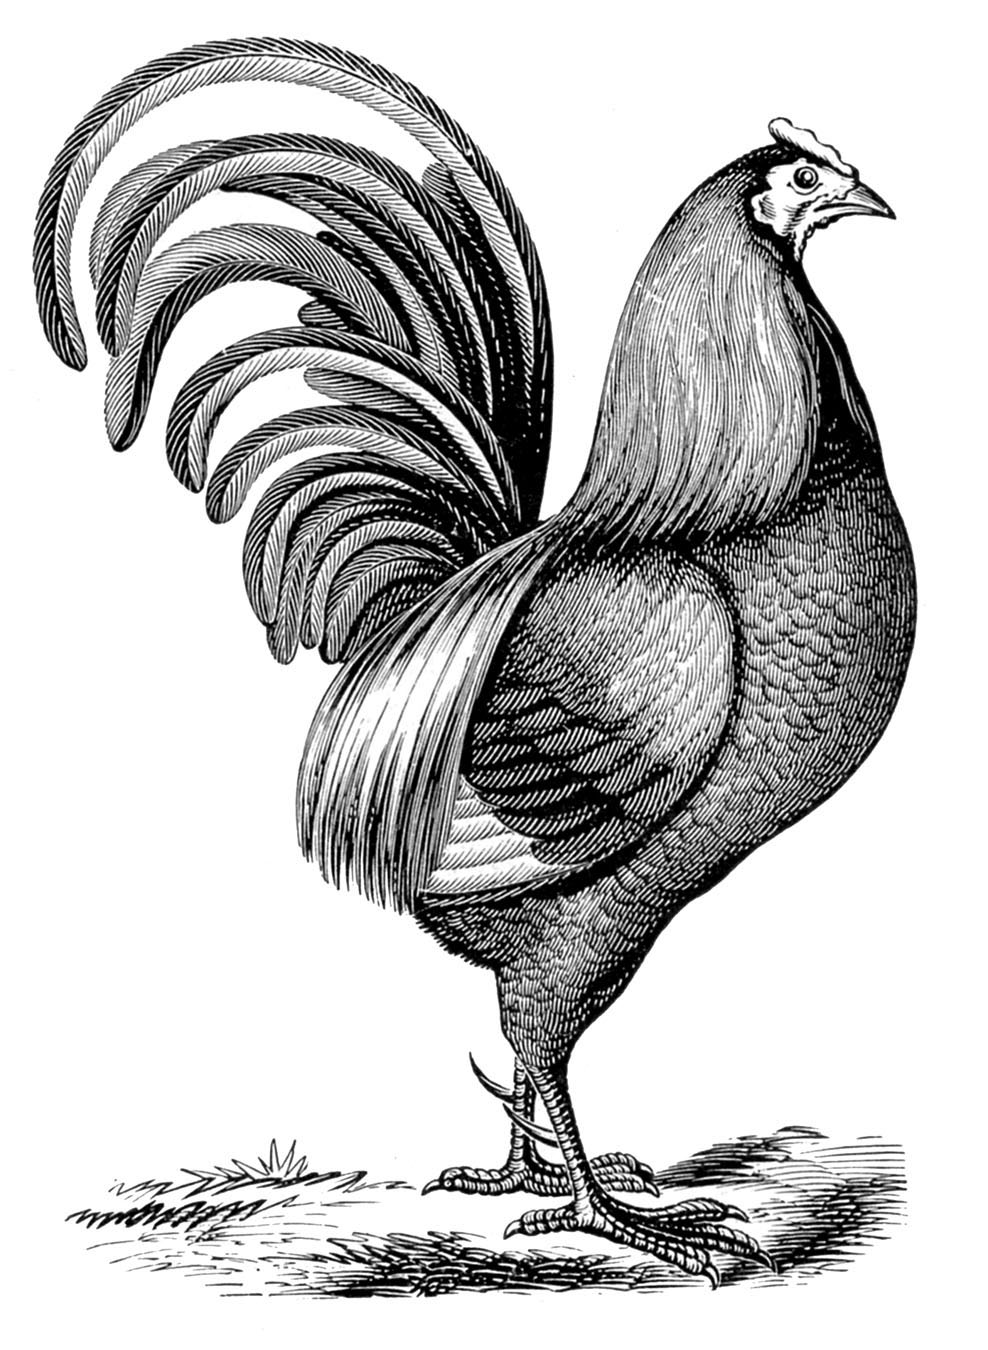 17 Rooster Images! - The Graphics Fairy